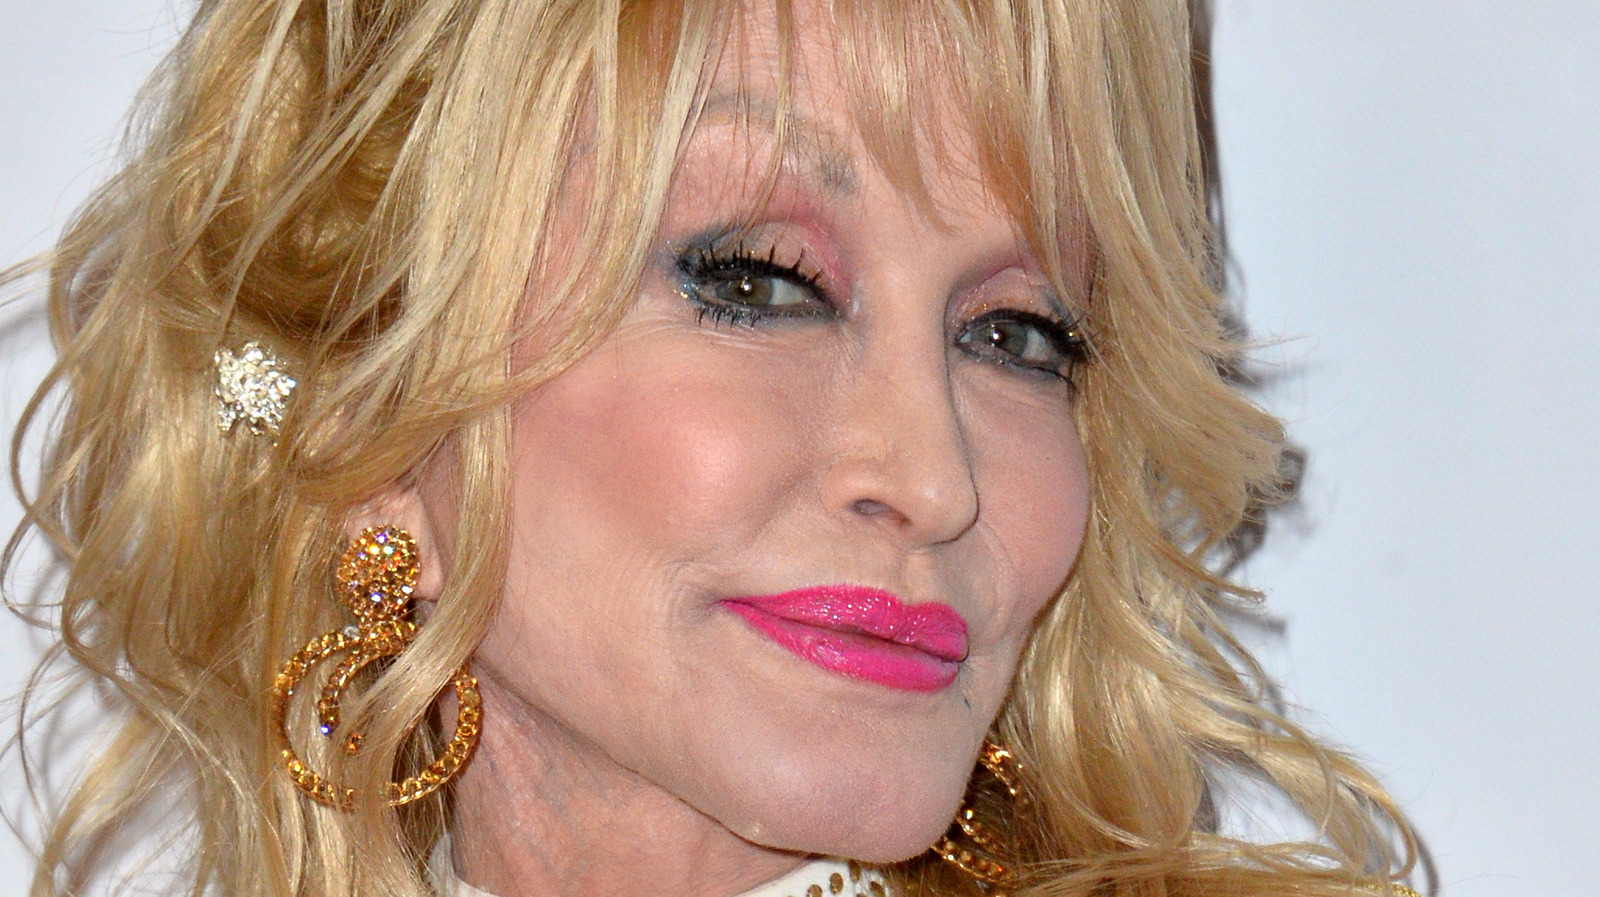 The Reason Dolly Parton's New Song Has Fans Divided